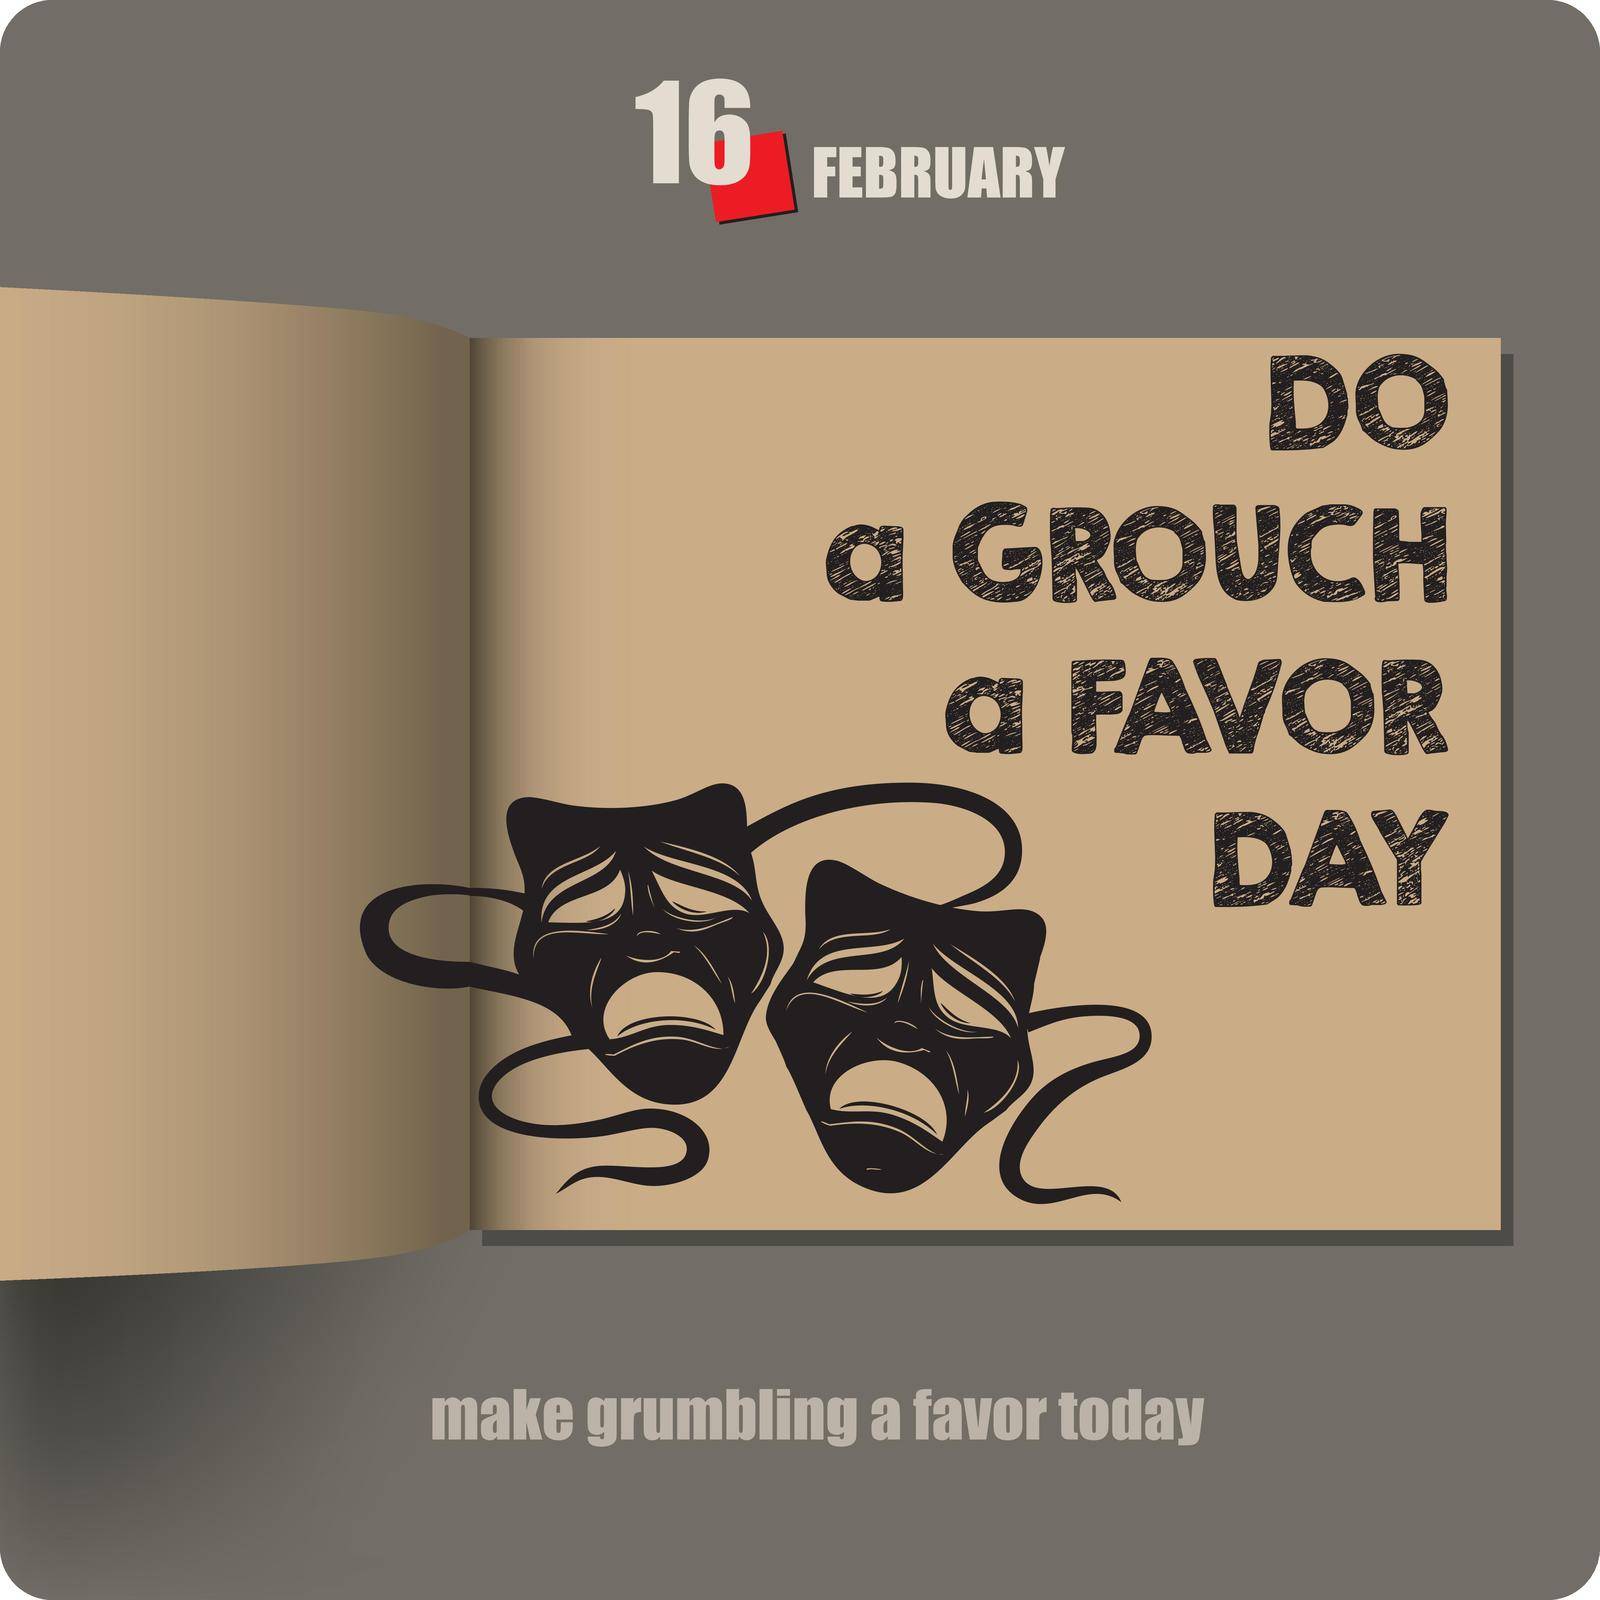 Make grumbling a favor today. 16 February - Do a Grouch a Favor Day